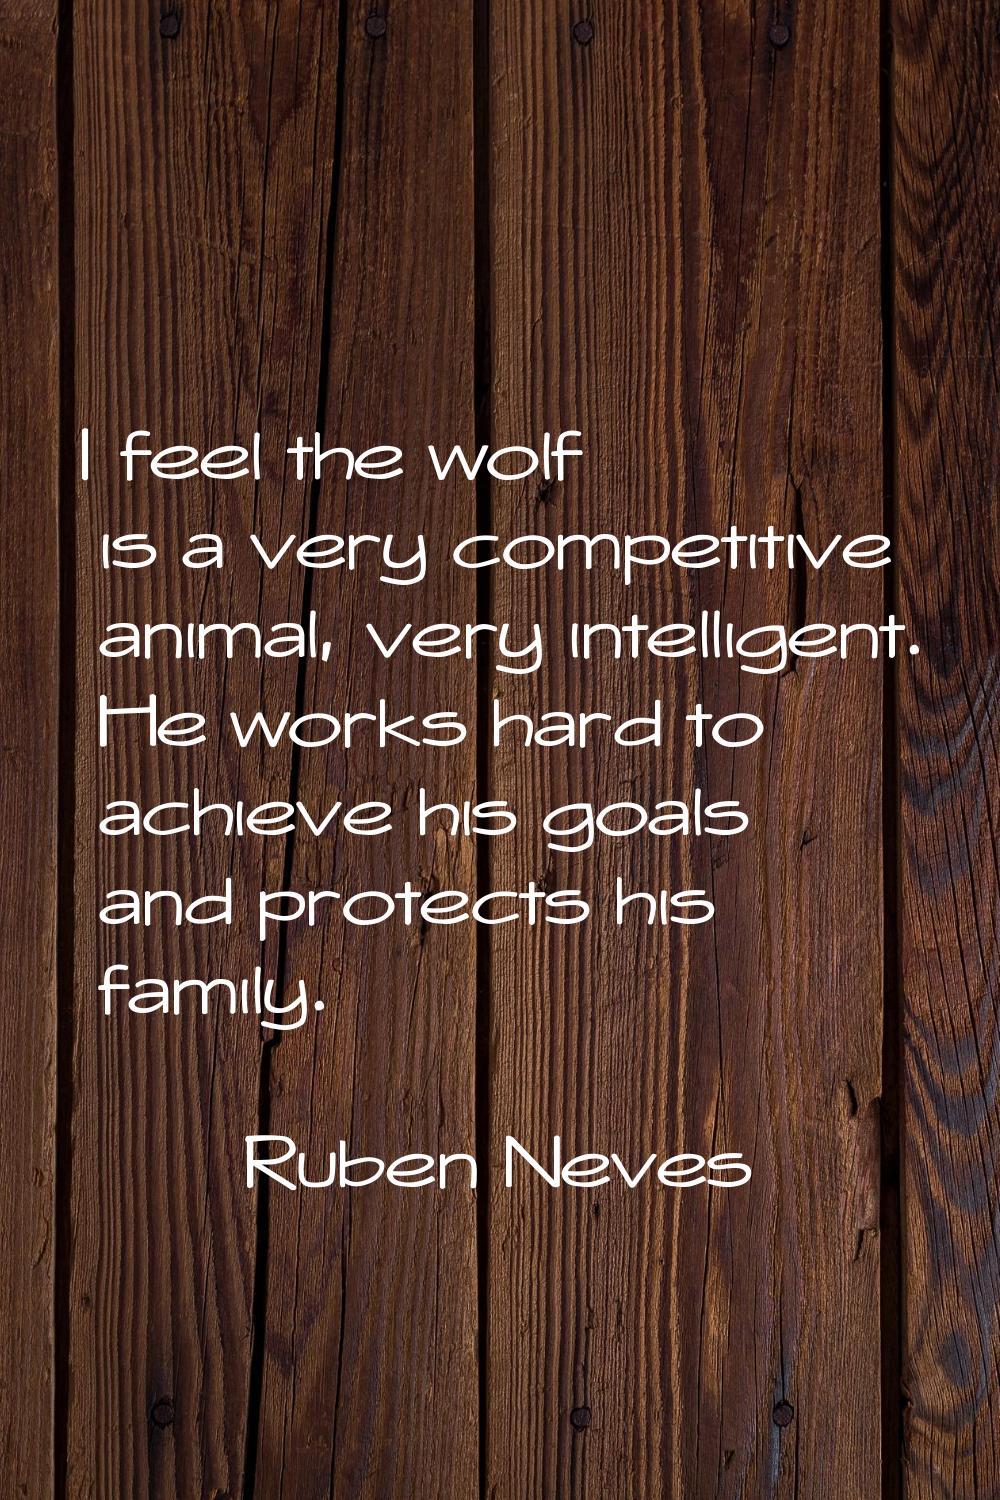 I feel the wolf is a very competitive animal, very intelligent. He works hard to achieve his goals 